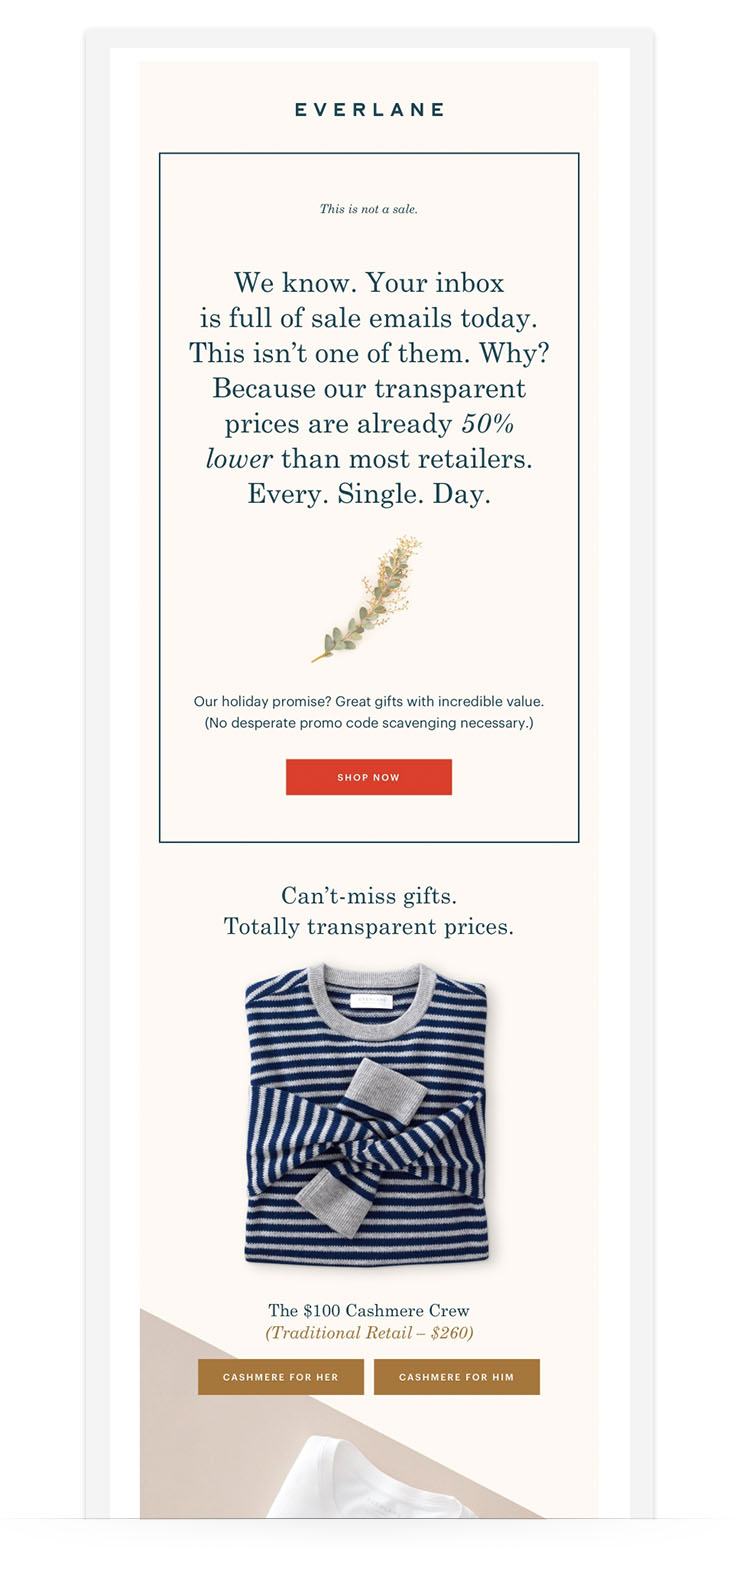 Cyber Monday Email Everlane